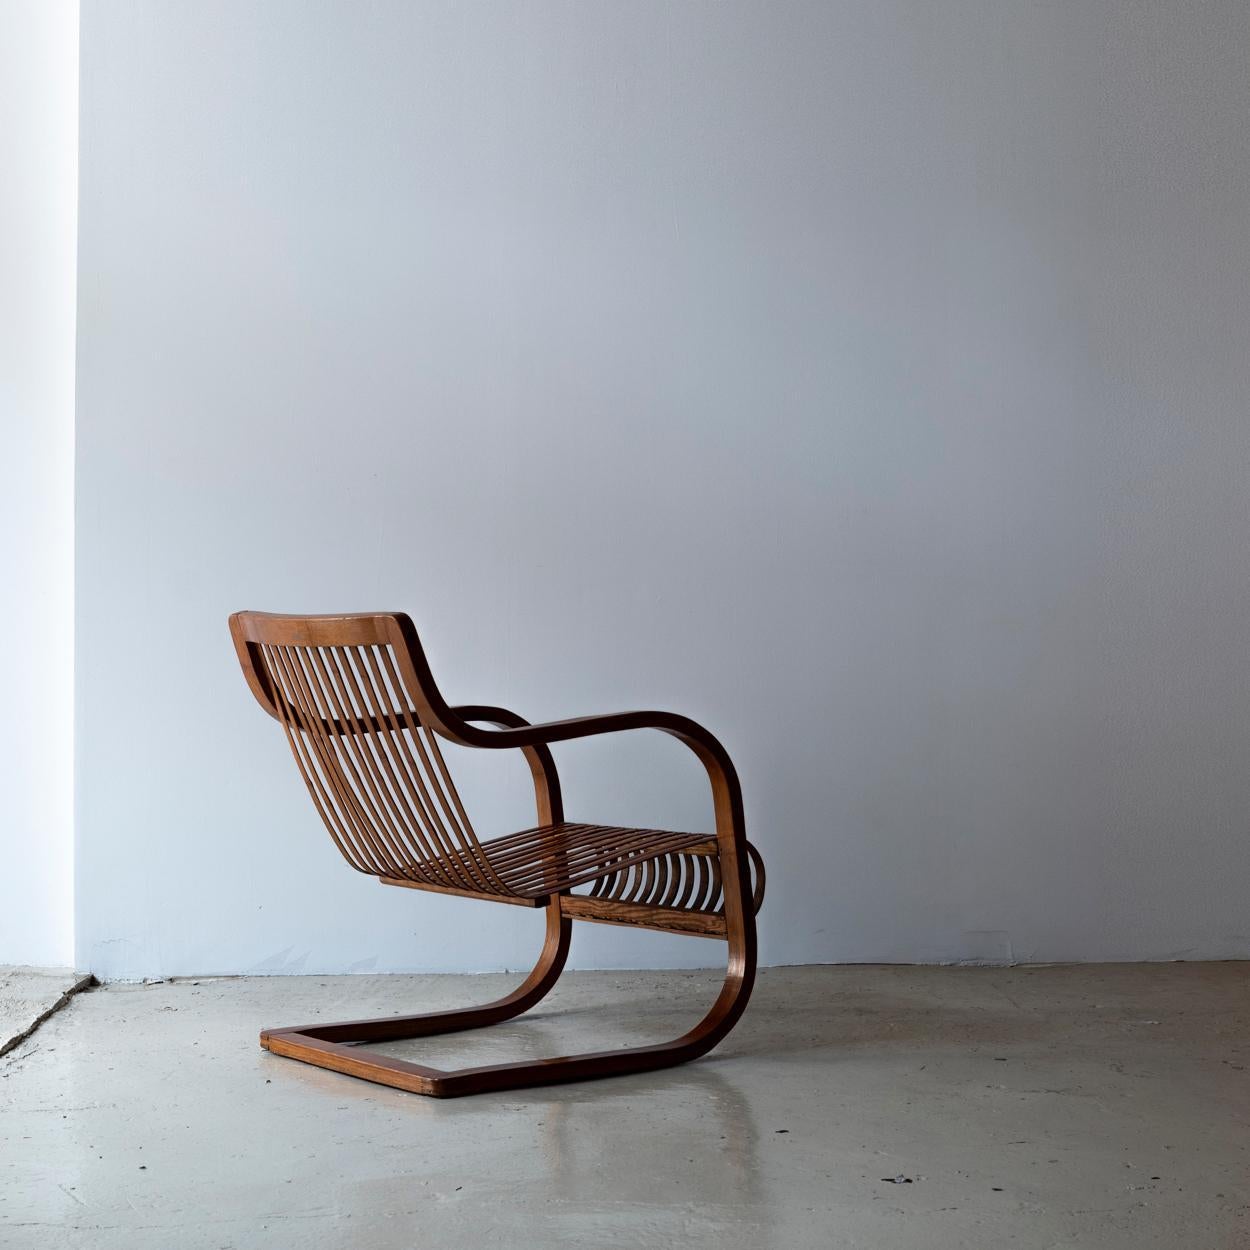 Bamboo chair designed by Ubunji Kidokoro in 1937 for the Mitsukoshi furniture design room. It was designed inspired by the design of Alvar Aalto's Model 31 armchair. The cantilever structure is made of naturally dried and de-oiled bamboo and